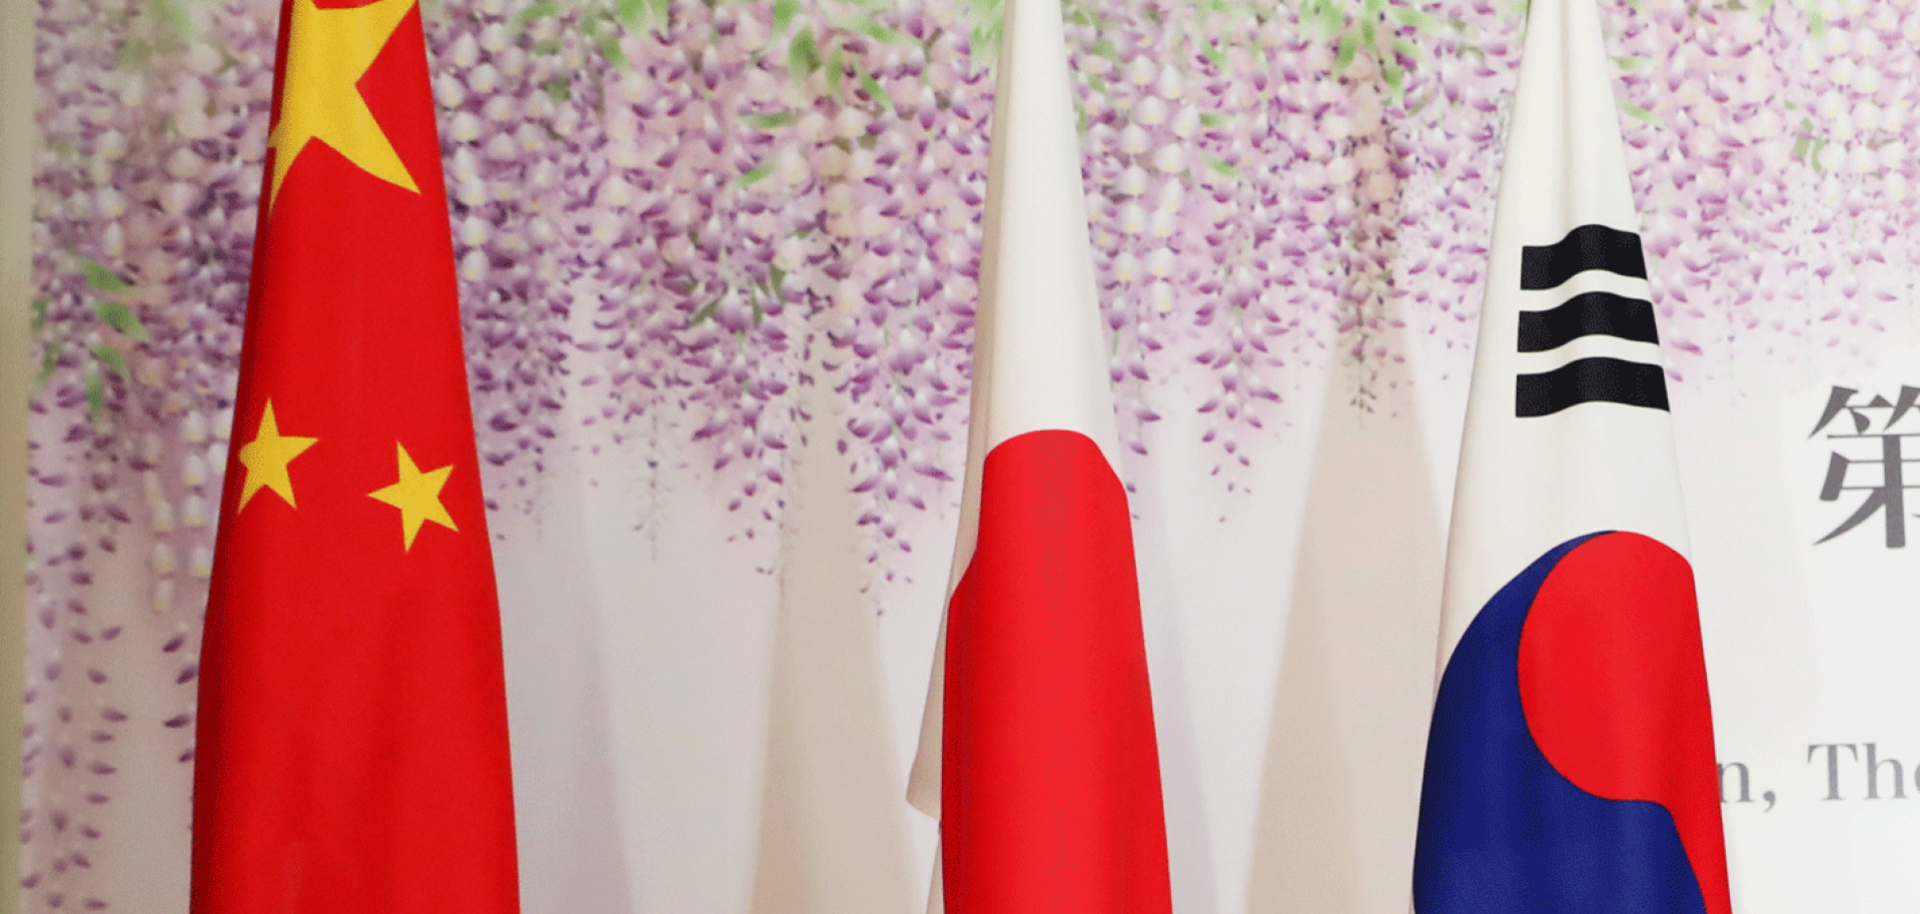 After three years of bumpy relations, China, Japan and South Korea have once again gathered for a trilateral summit as they look for a way to harness their economic heft.